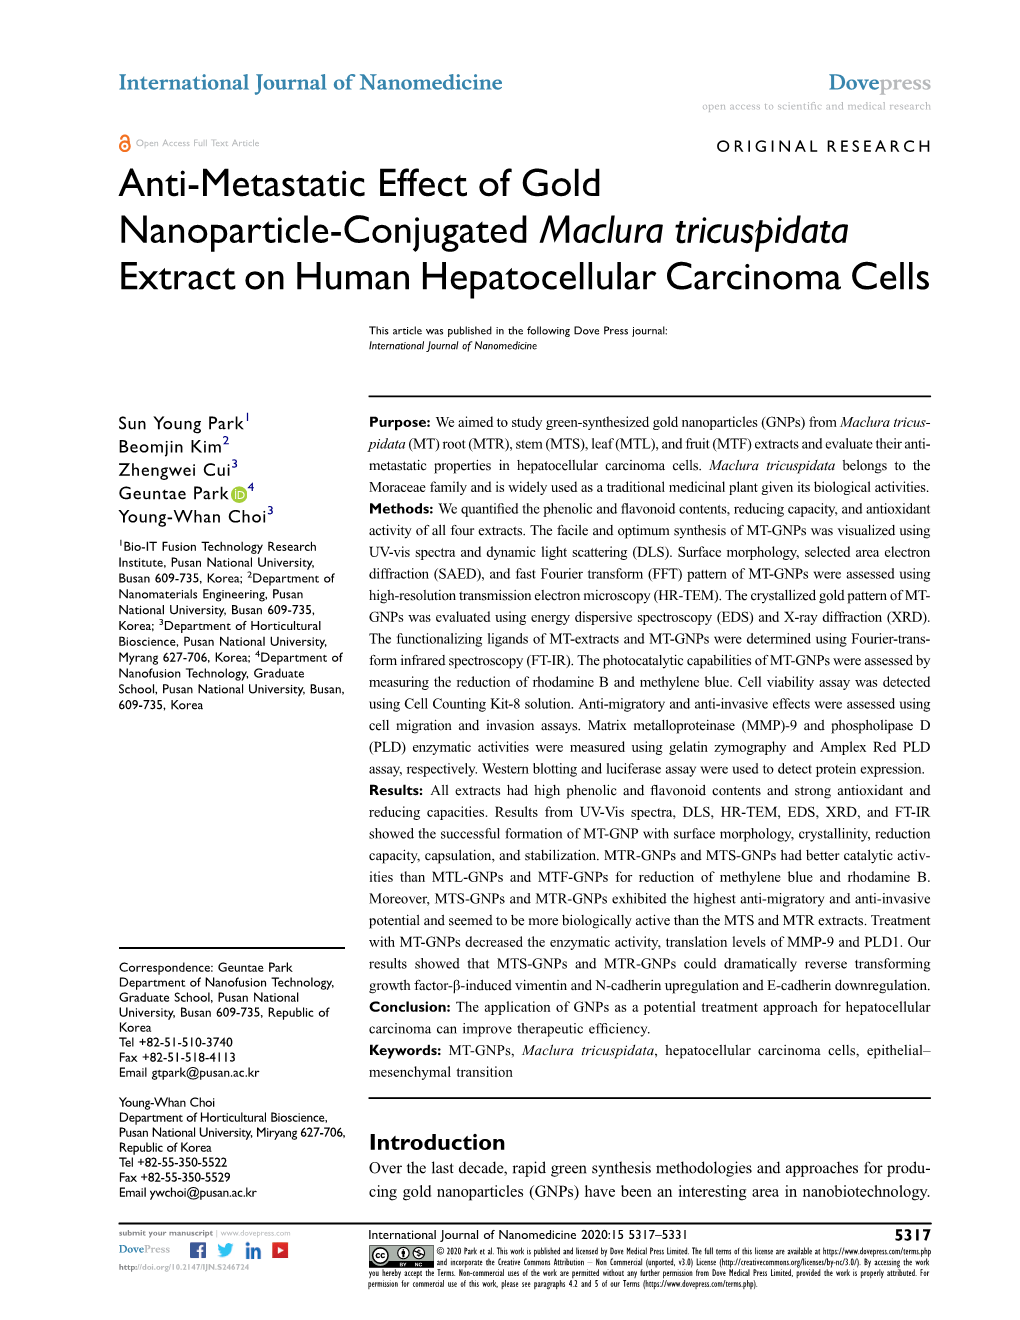 Anti-Metastatic Effect of Gold Nanoparticle-Conjugated Maclura Tricuspidata Extract on Human Hepatocellular Carcinoma Cells